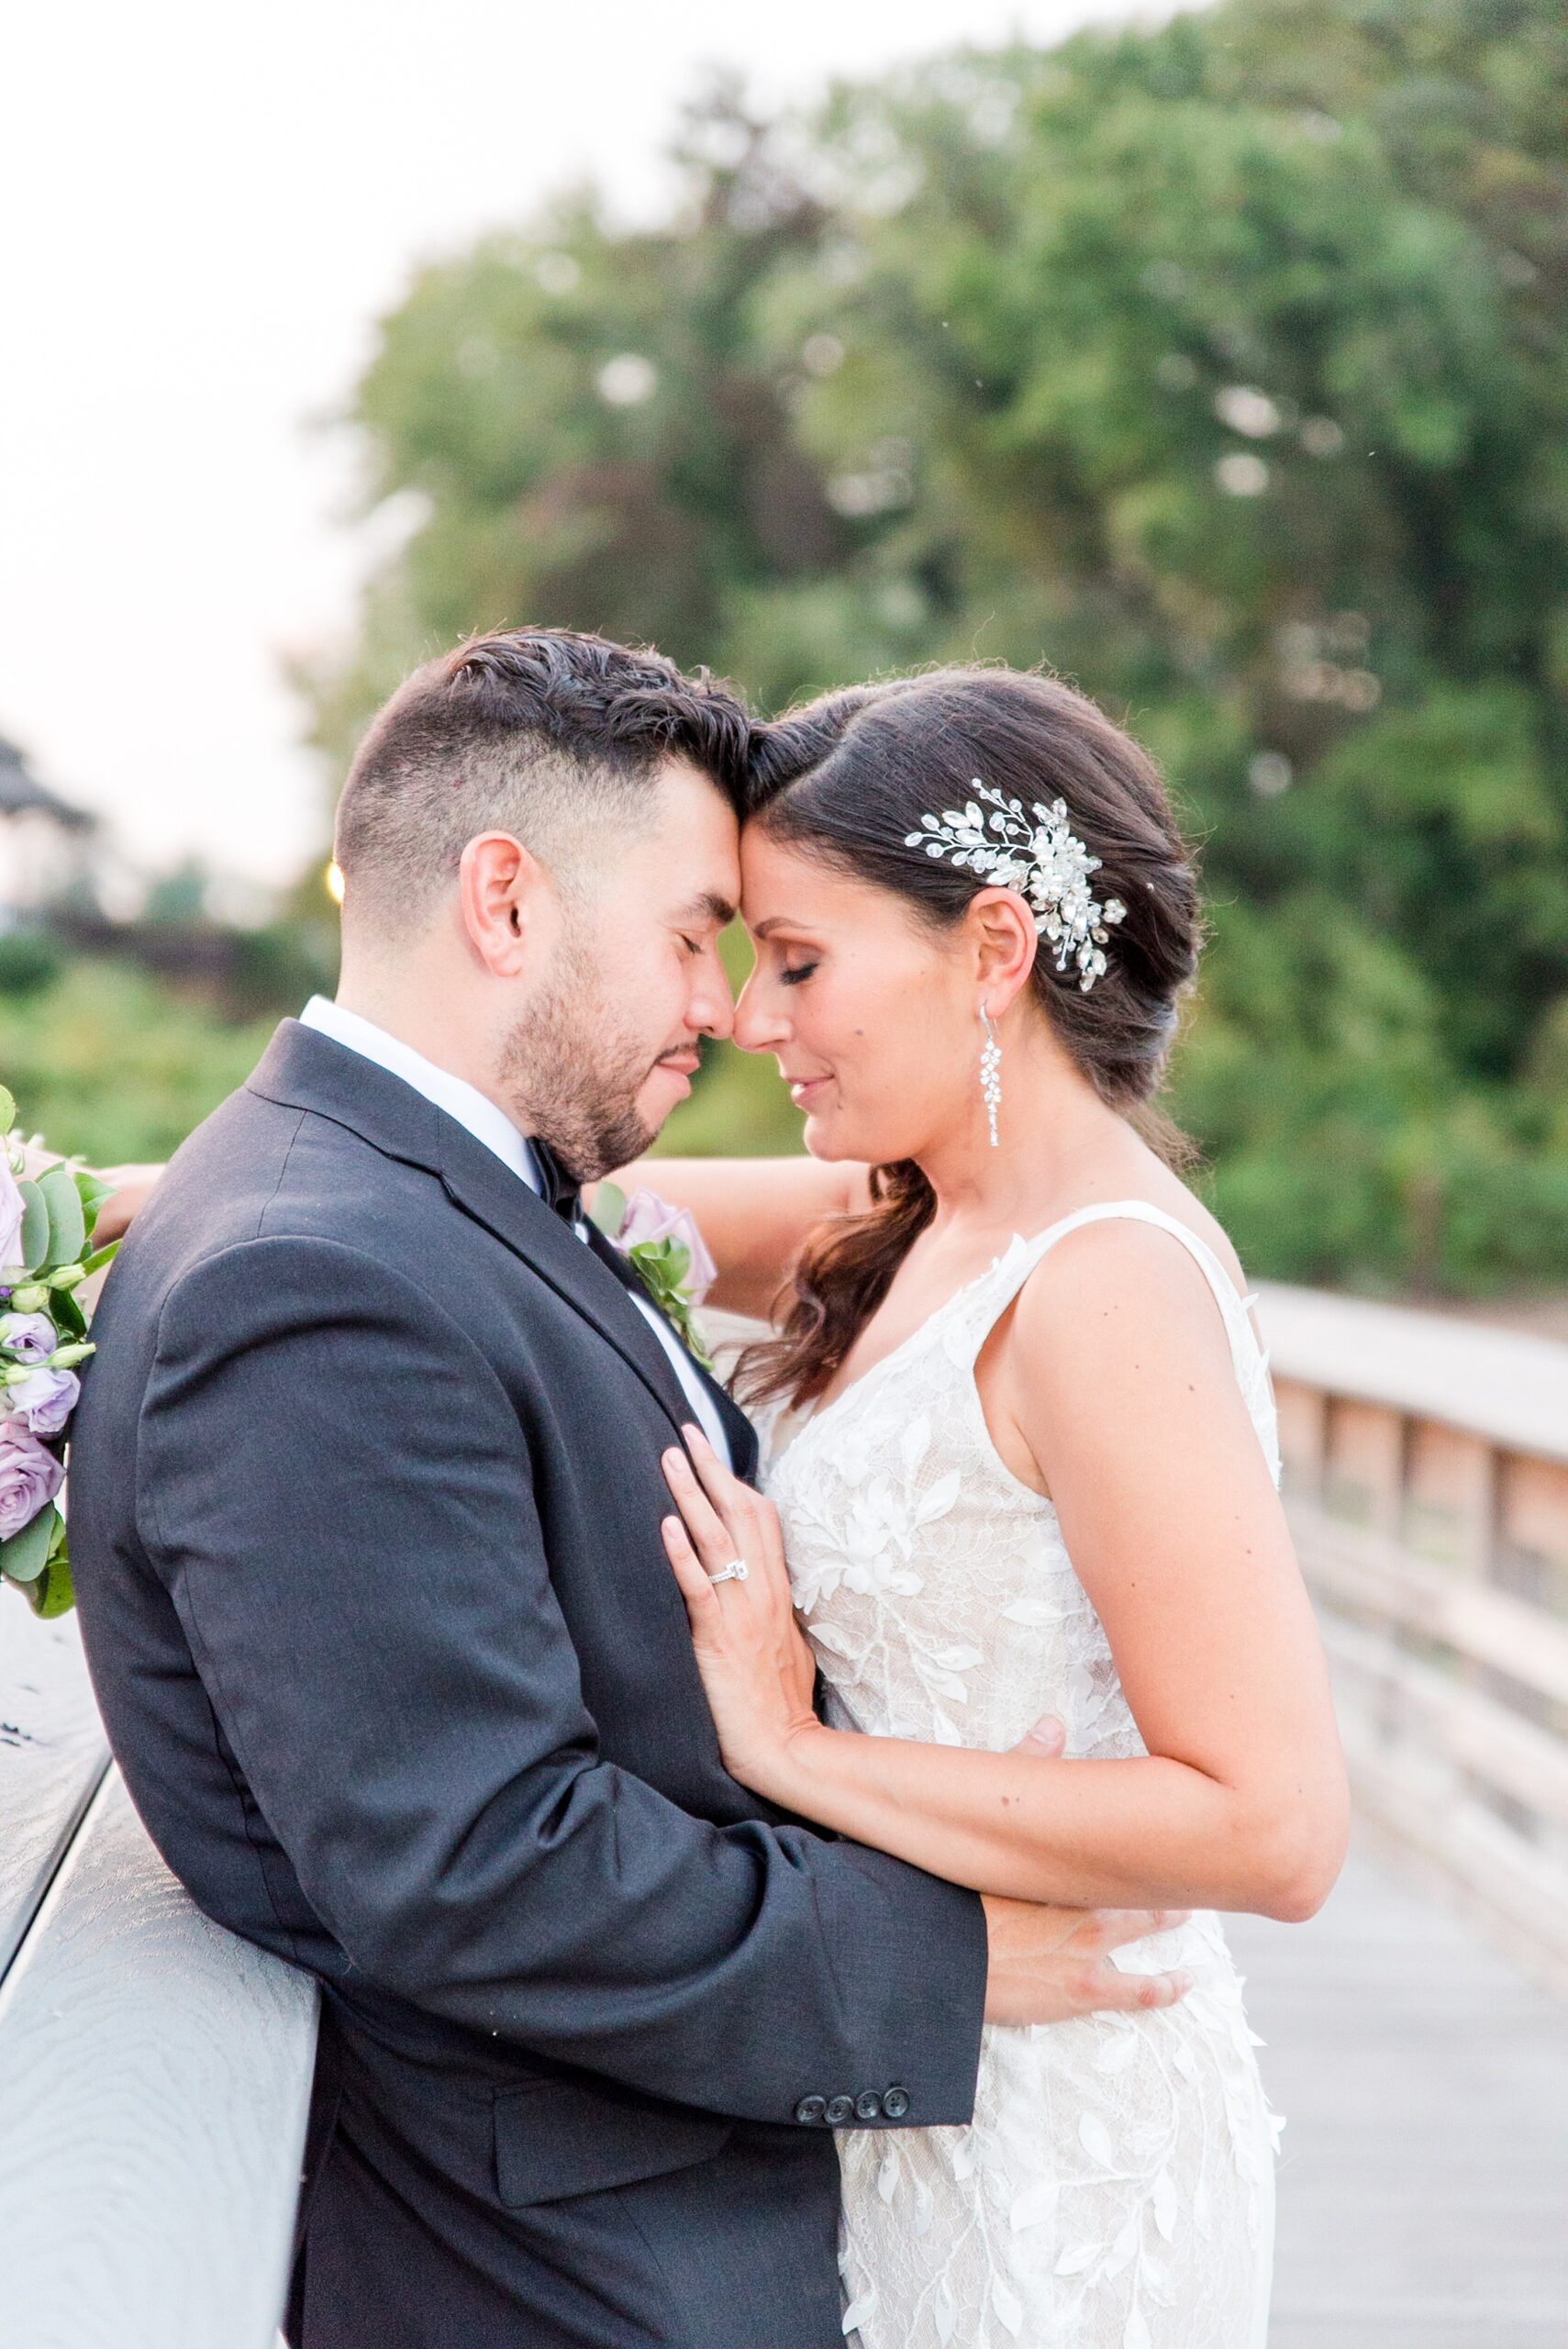 Newlyweds share an intimate moment hugging and leaning on a boardwalk